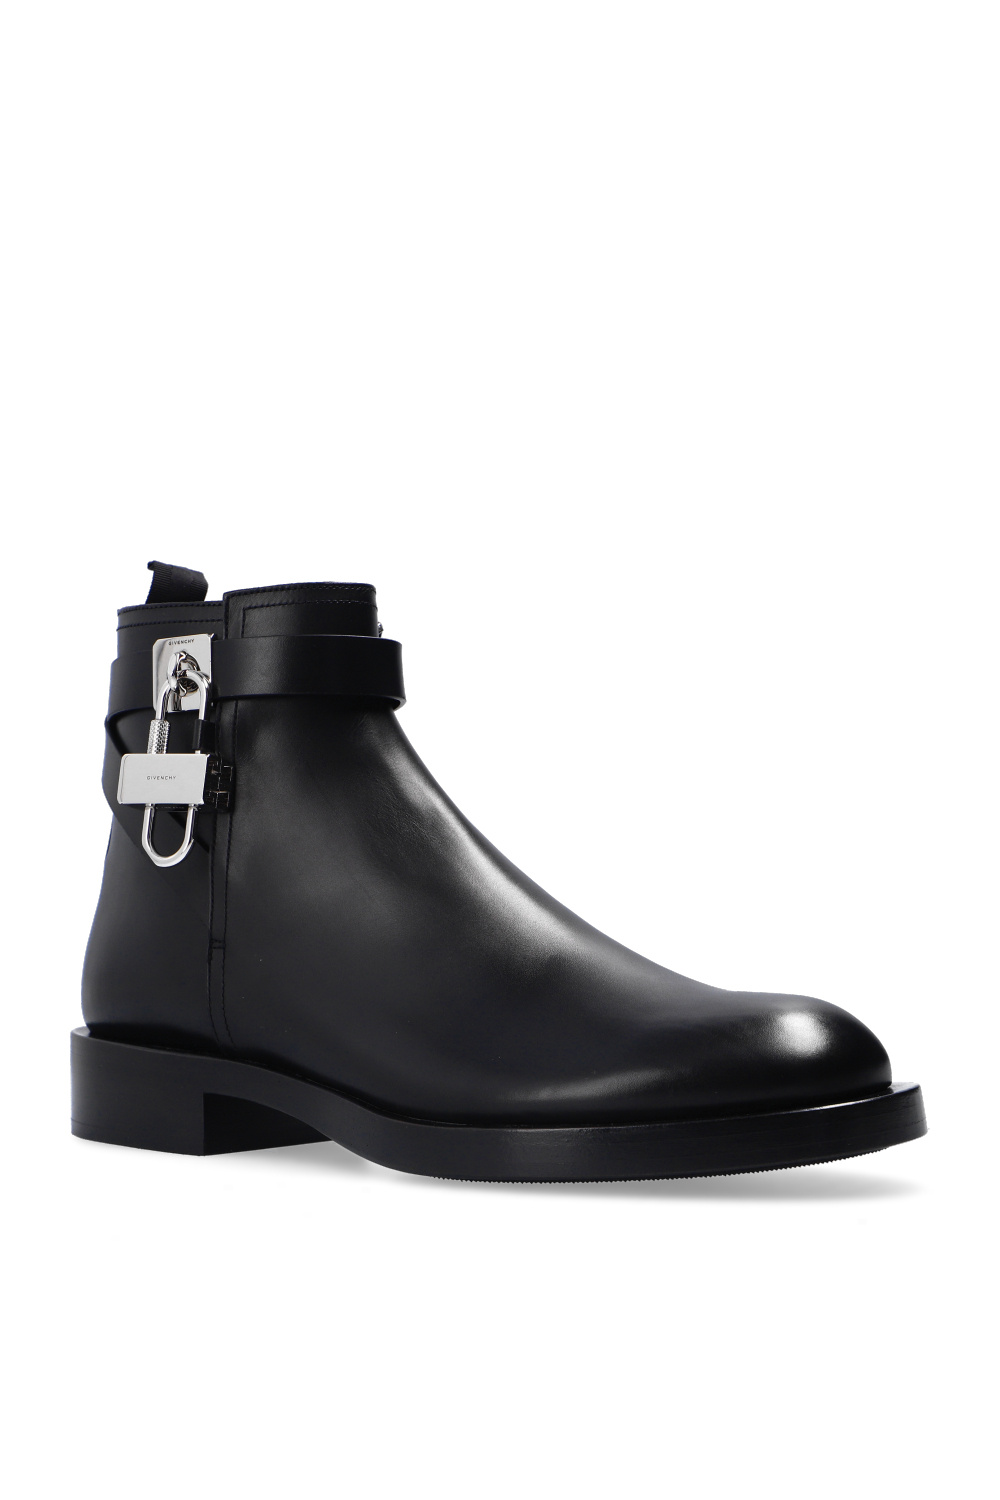 Givenchy Leather boots